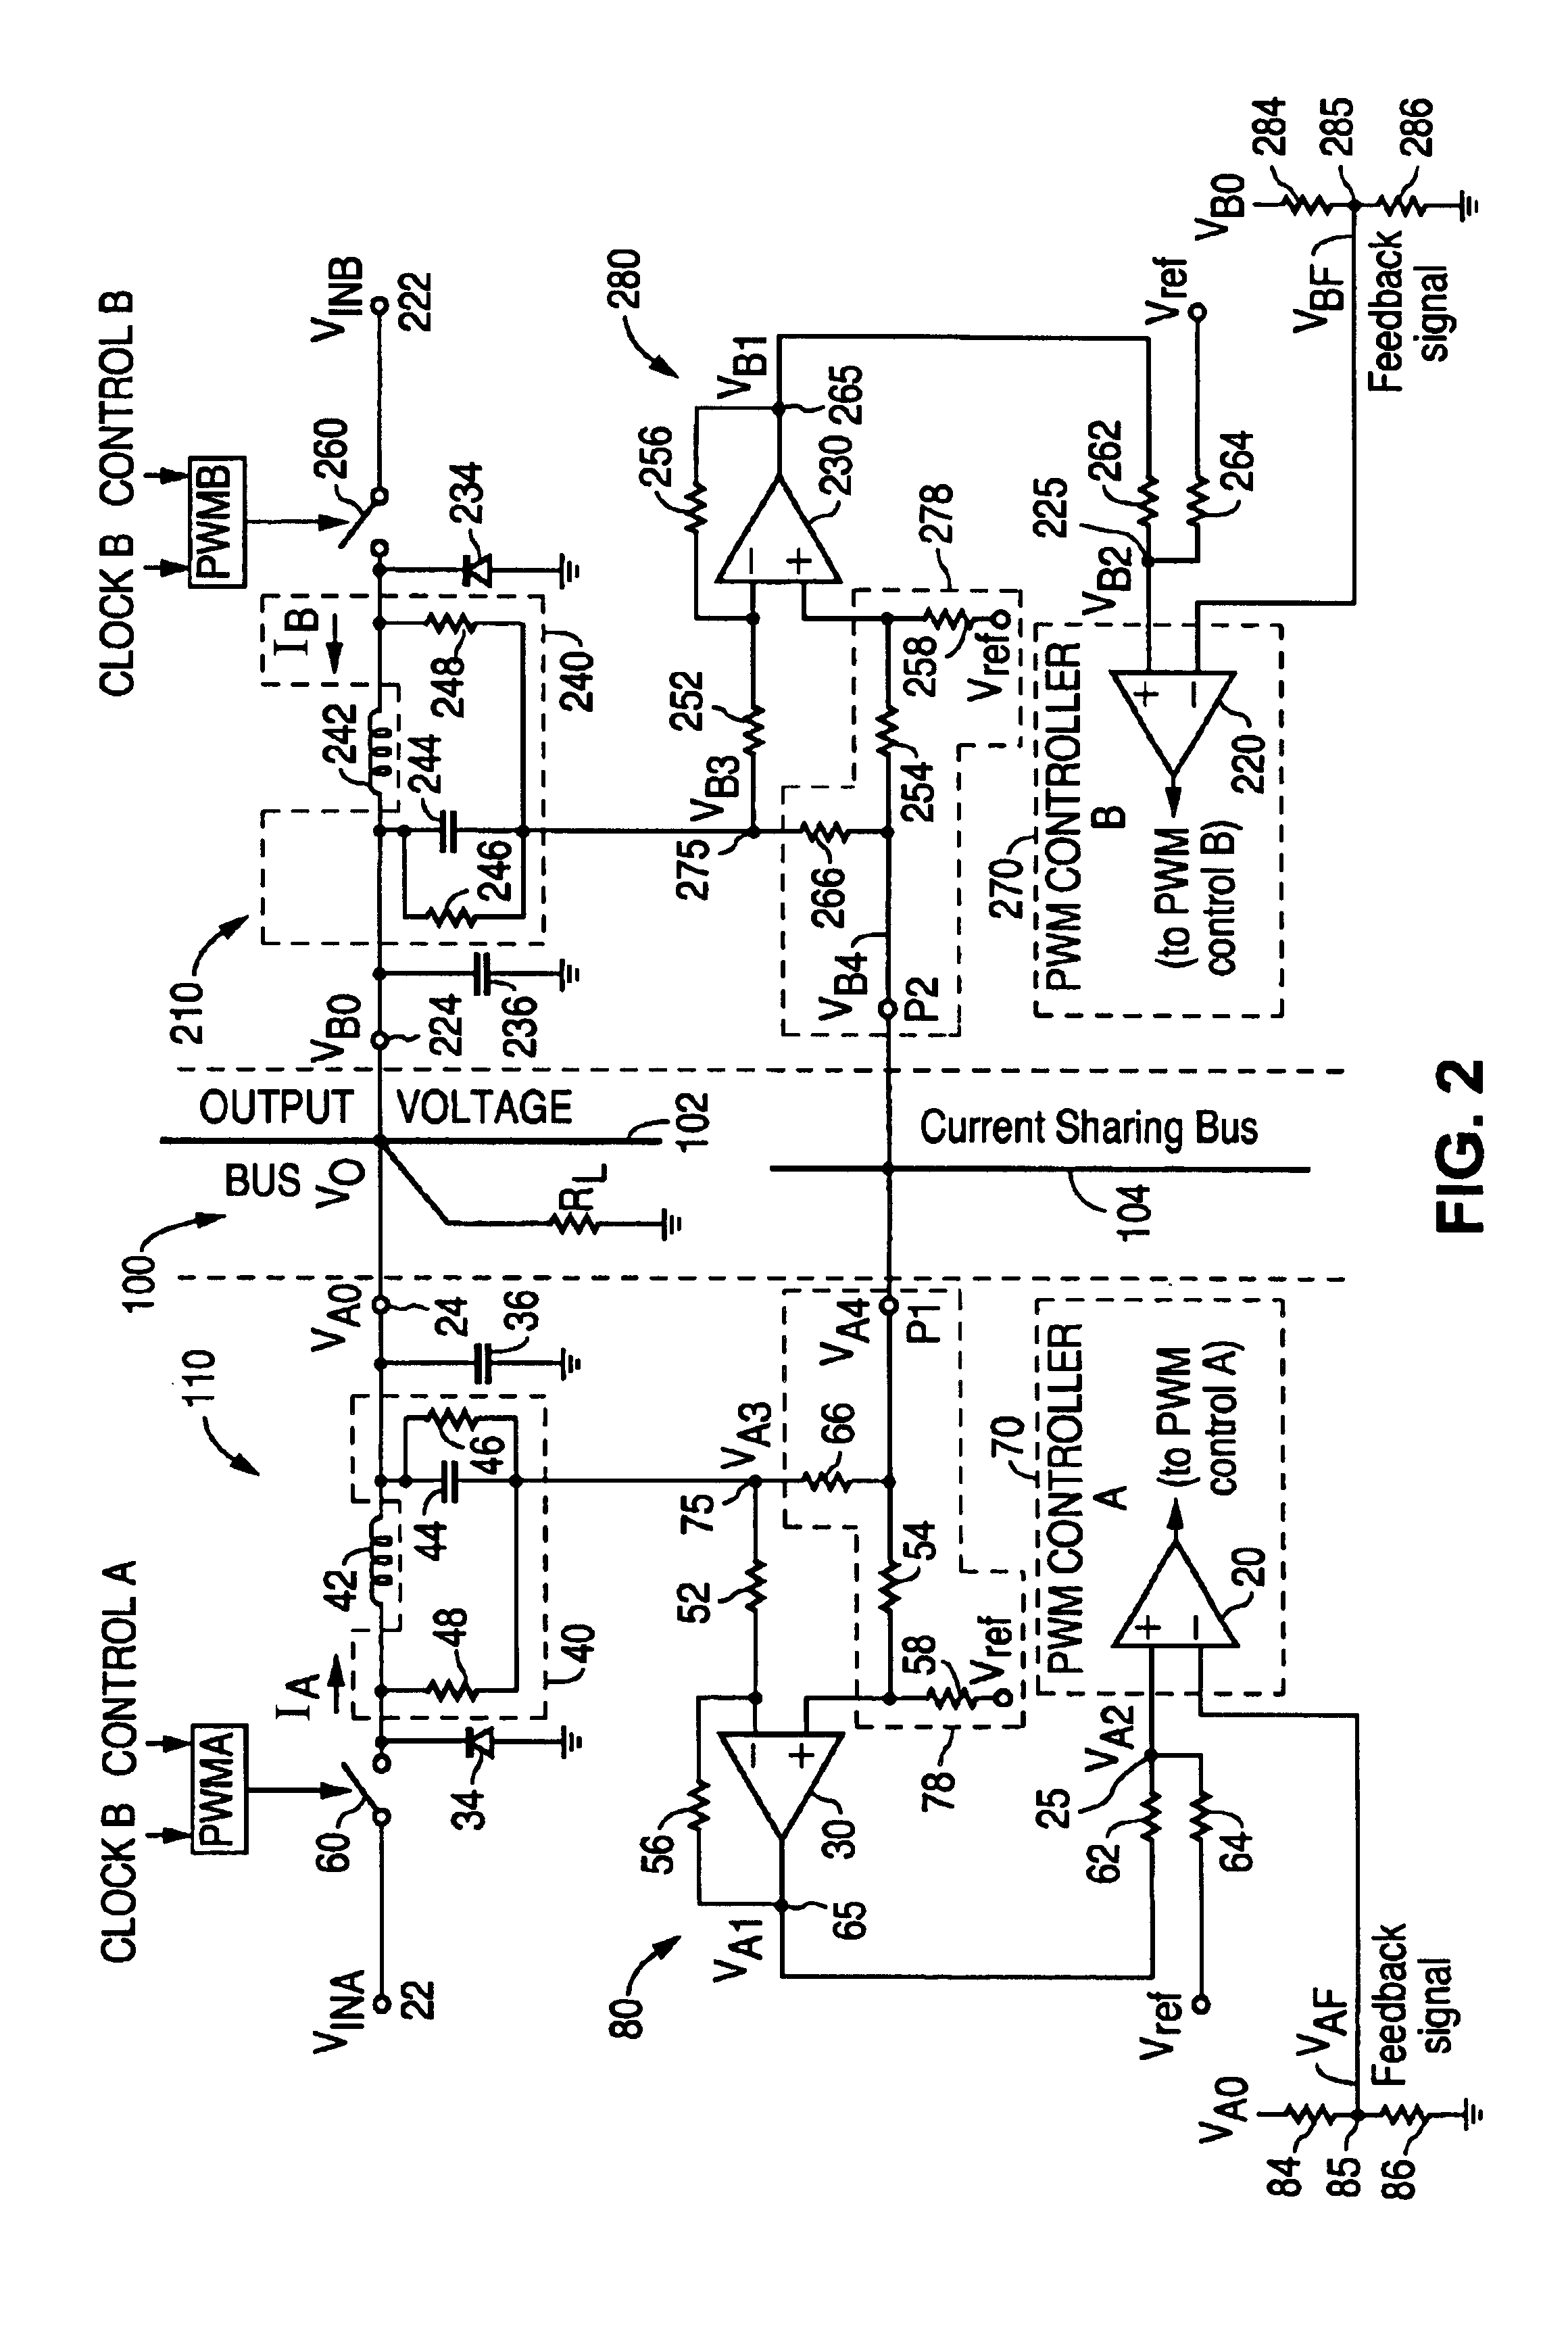 Active current sharing circuit